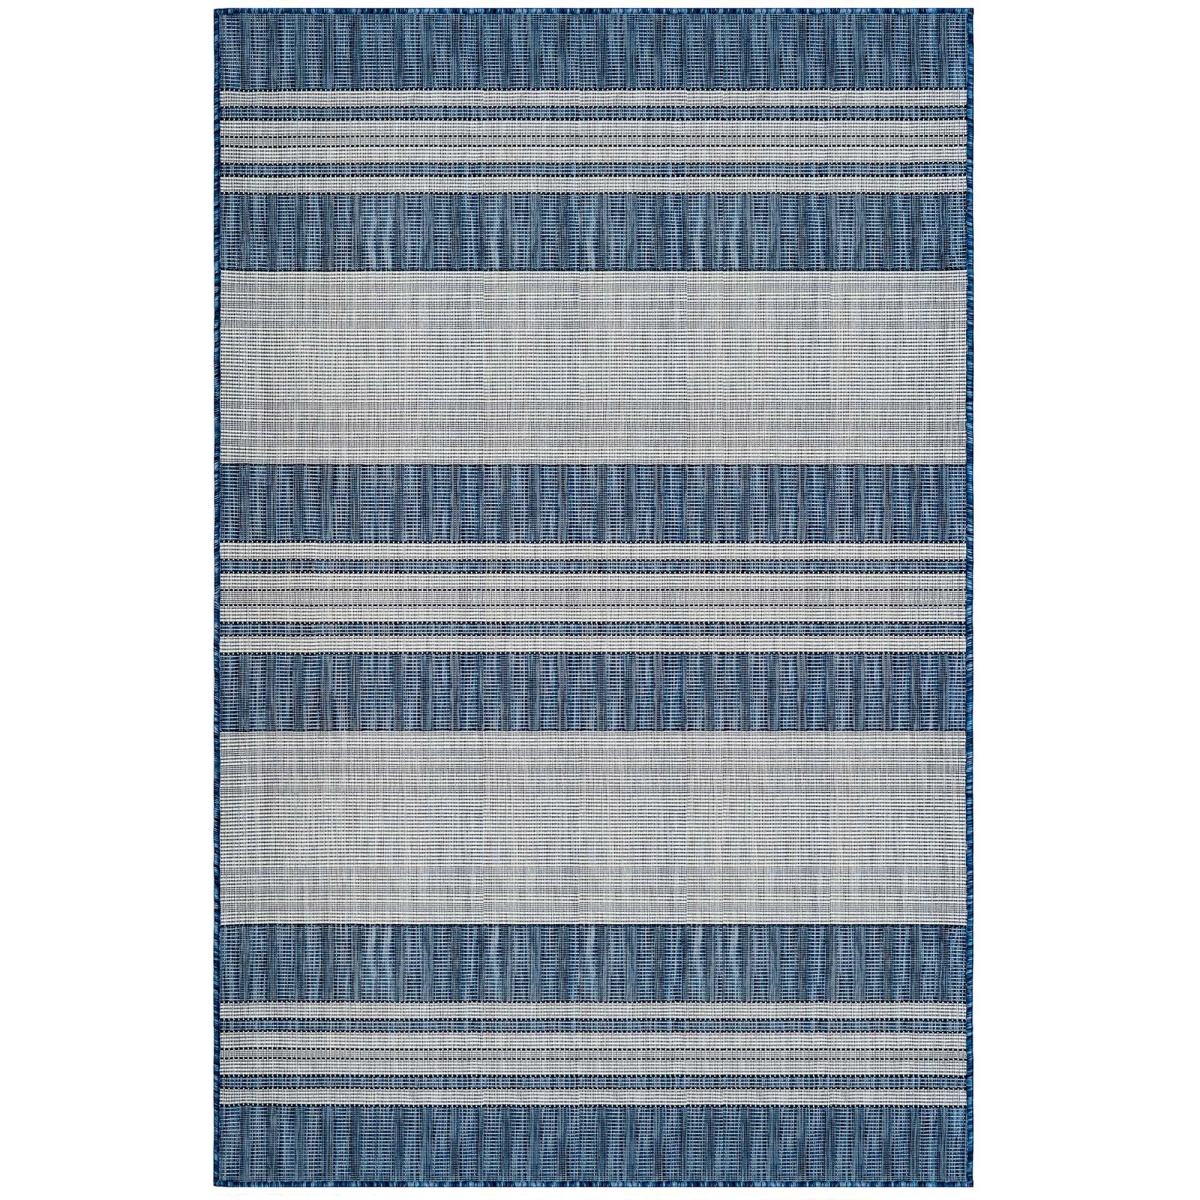 Trans-ocean Imports Cre58843533 4 Ft. 10 In. X 7 Ft. 6 In. Liora Manne Carmel Stripe Indoor & Outdoor Wilton Woven Rectangle Rug - Navy